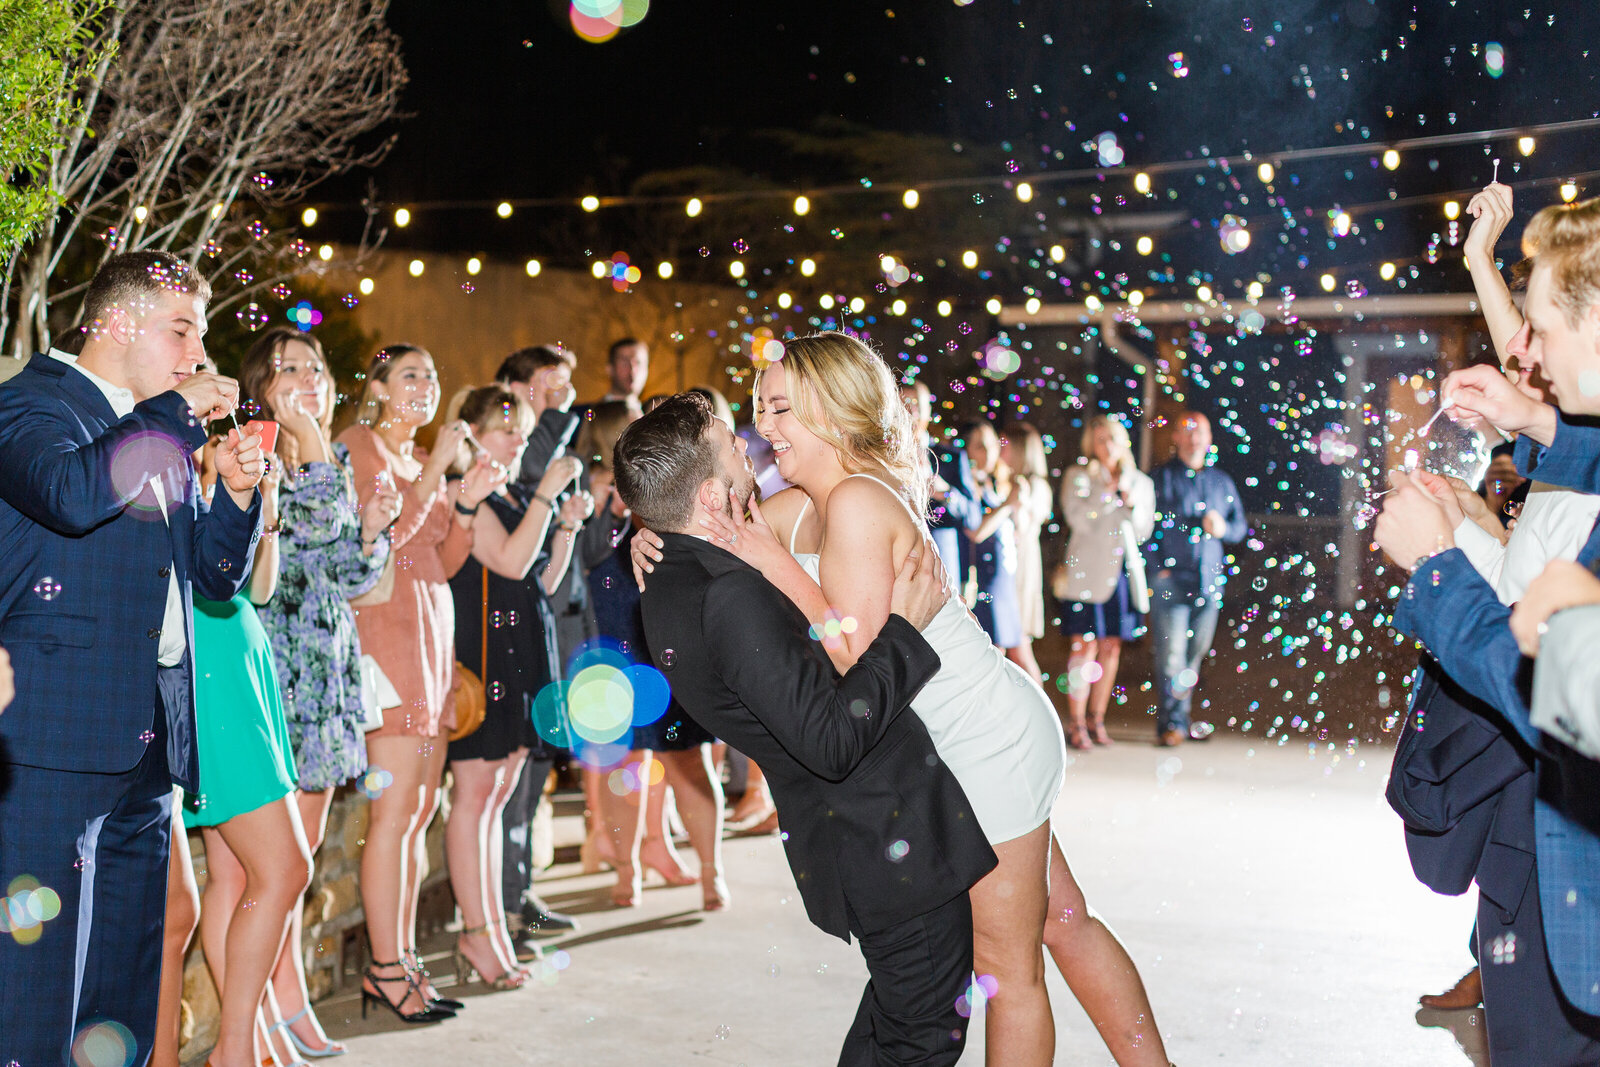 Couple kisses as they exit their luxurious wedding at Silo Event Center while guests cheer and blow bubbles.